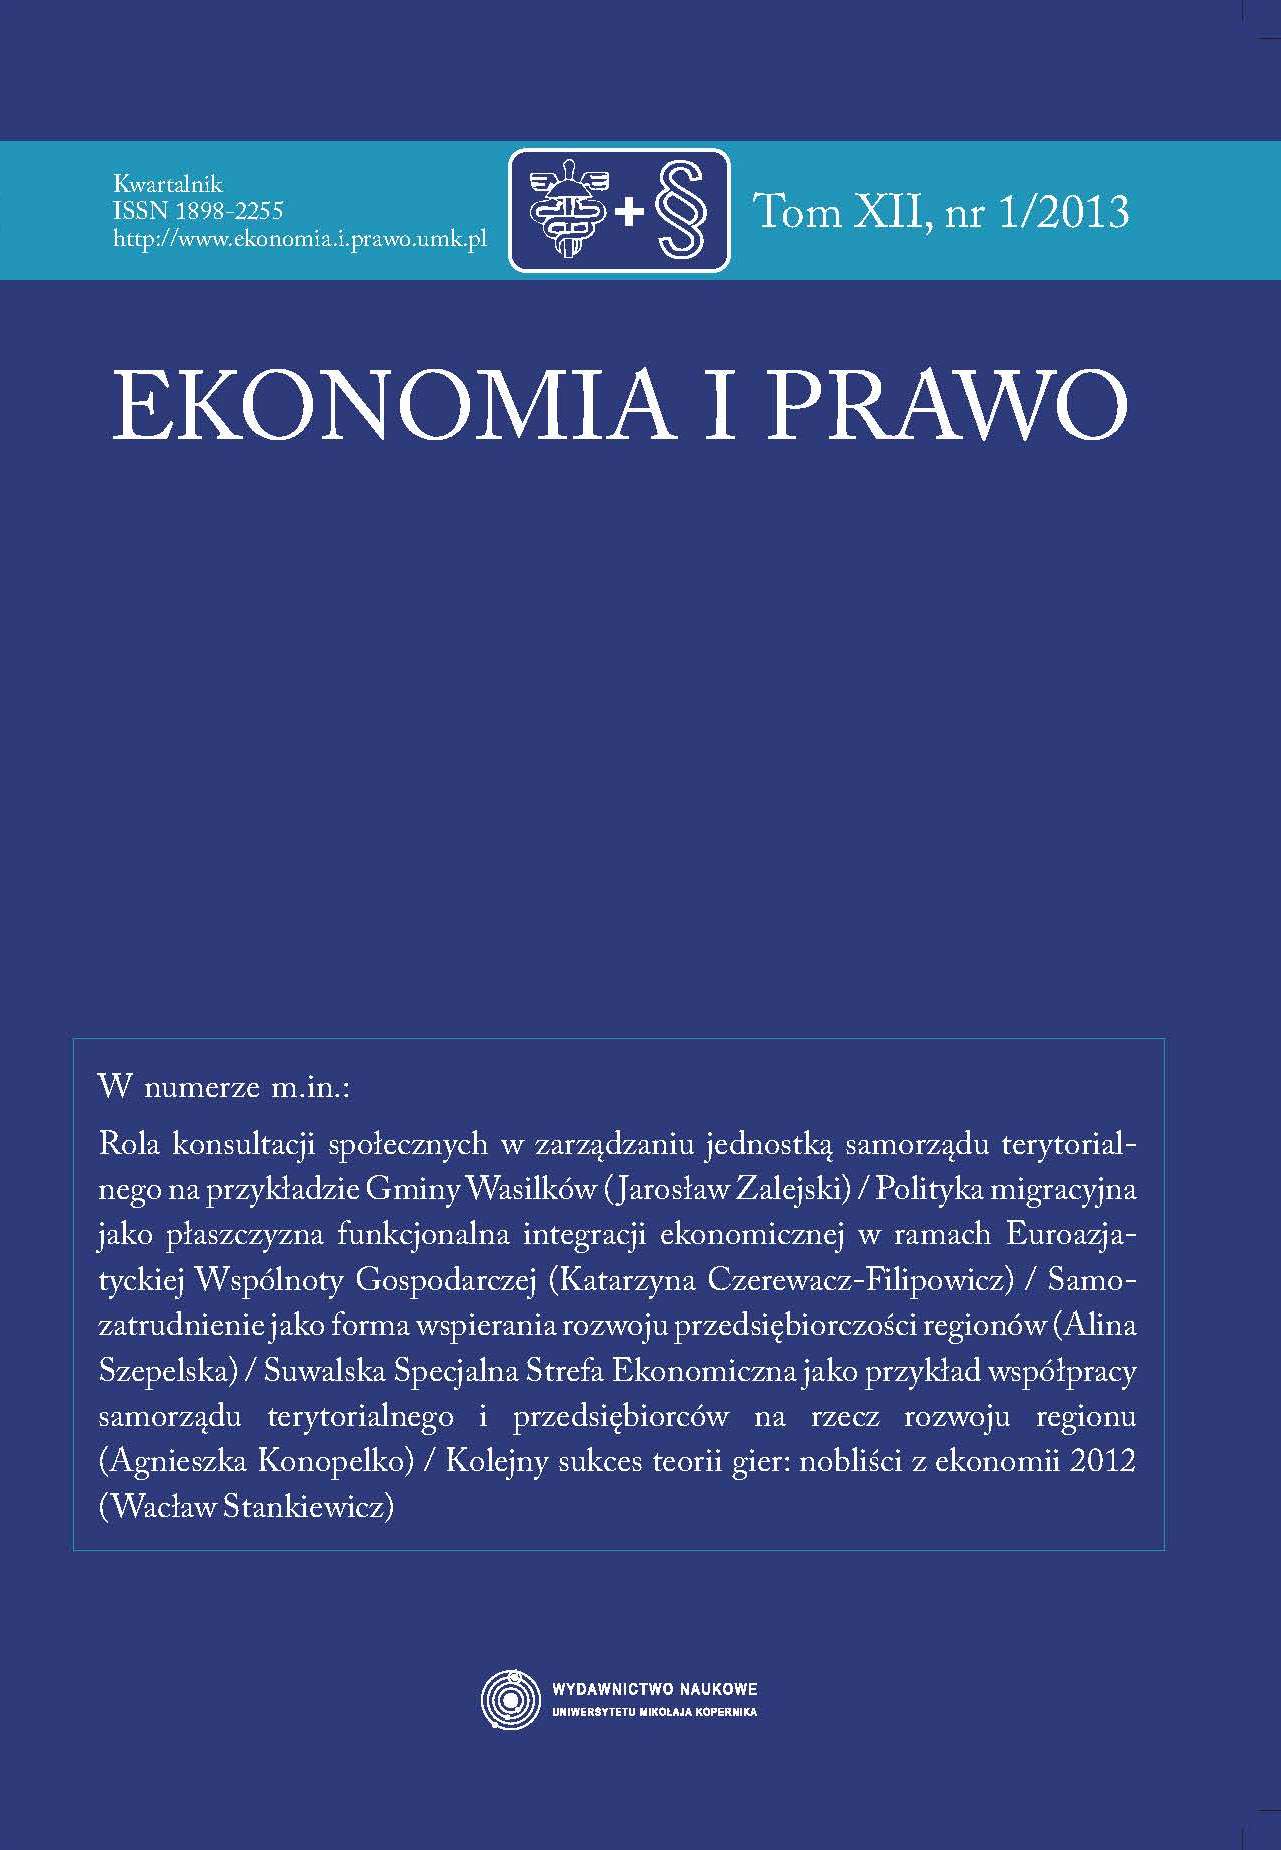 MIGRATION POLICY AS A FUNCTIONAL PLATFORM OF ECONOMIC INTEGRATION WITHIN THE EURASIAN ECONOMIC COMMUNITY Cover Image